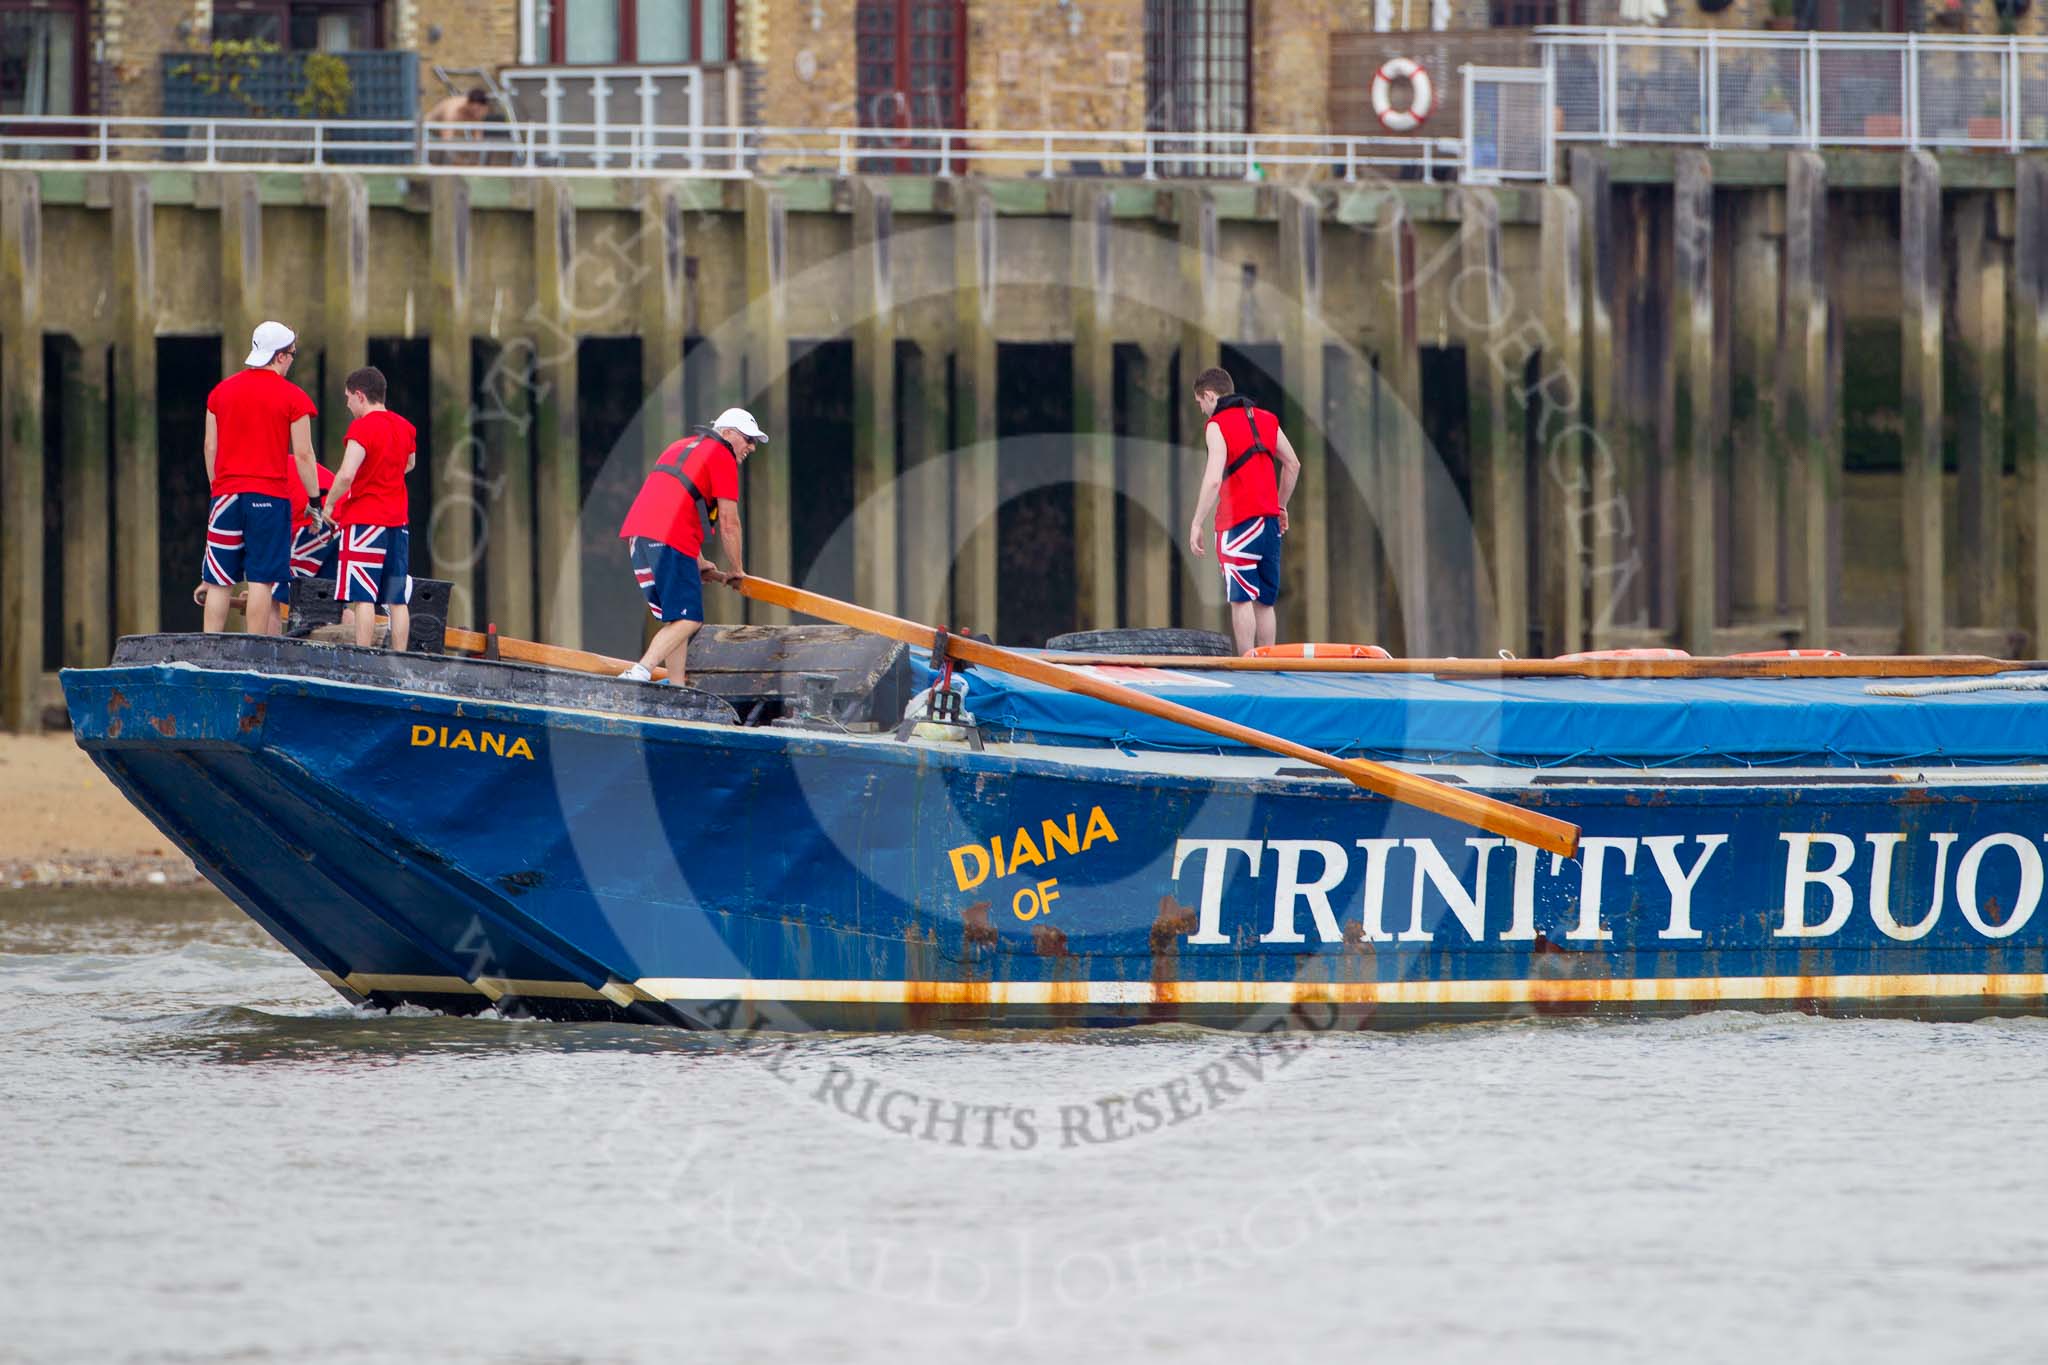 TOW River Thames Barge Driving Race 2013: Barge "Diana", by Trinity Buoy Wharf..
River Thames between Greenwich and Westminster,
London,

United Kingdom,
on 13 July 2013 at 13:24, image #329